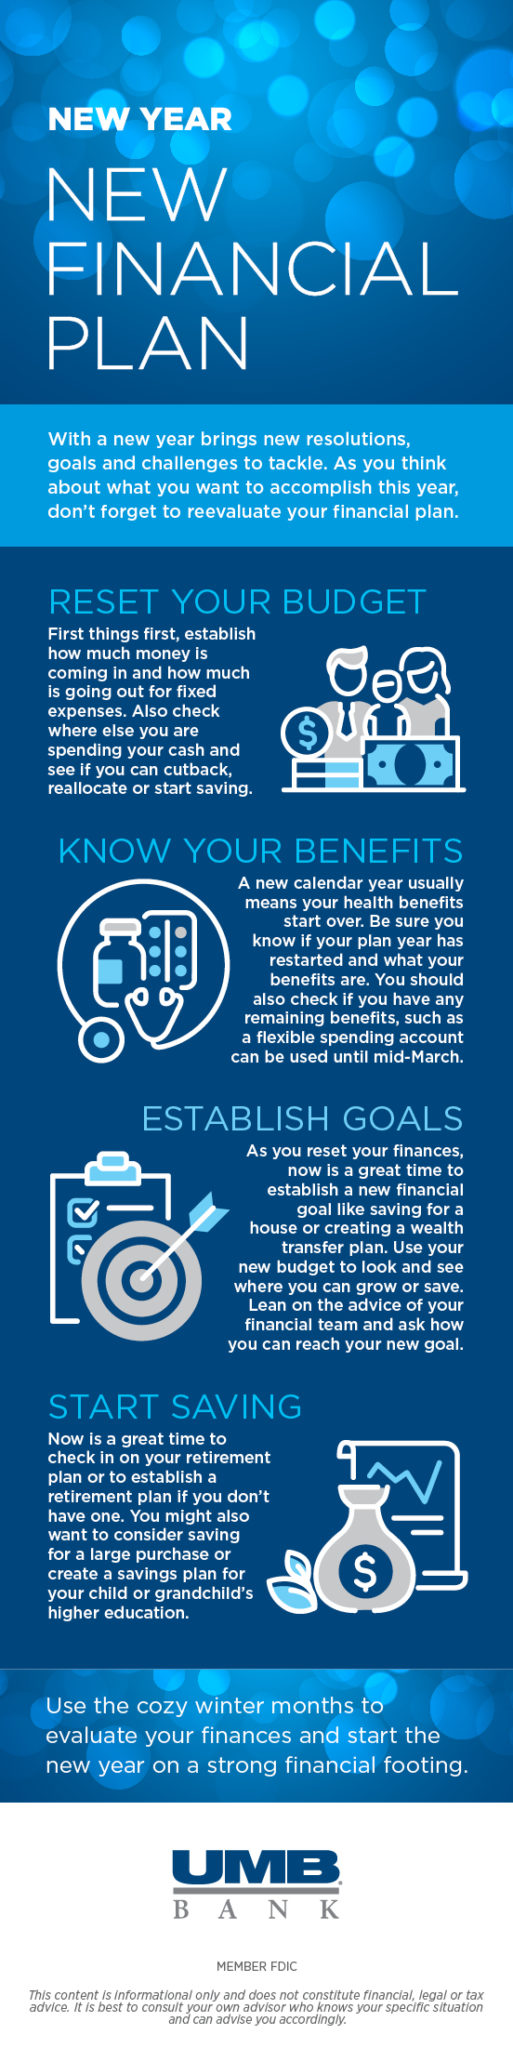 Retail banking January infographic New Year financial plan BLOG r1